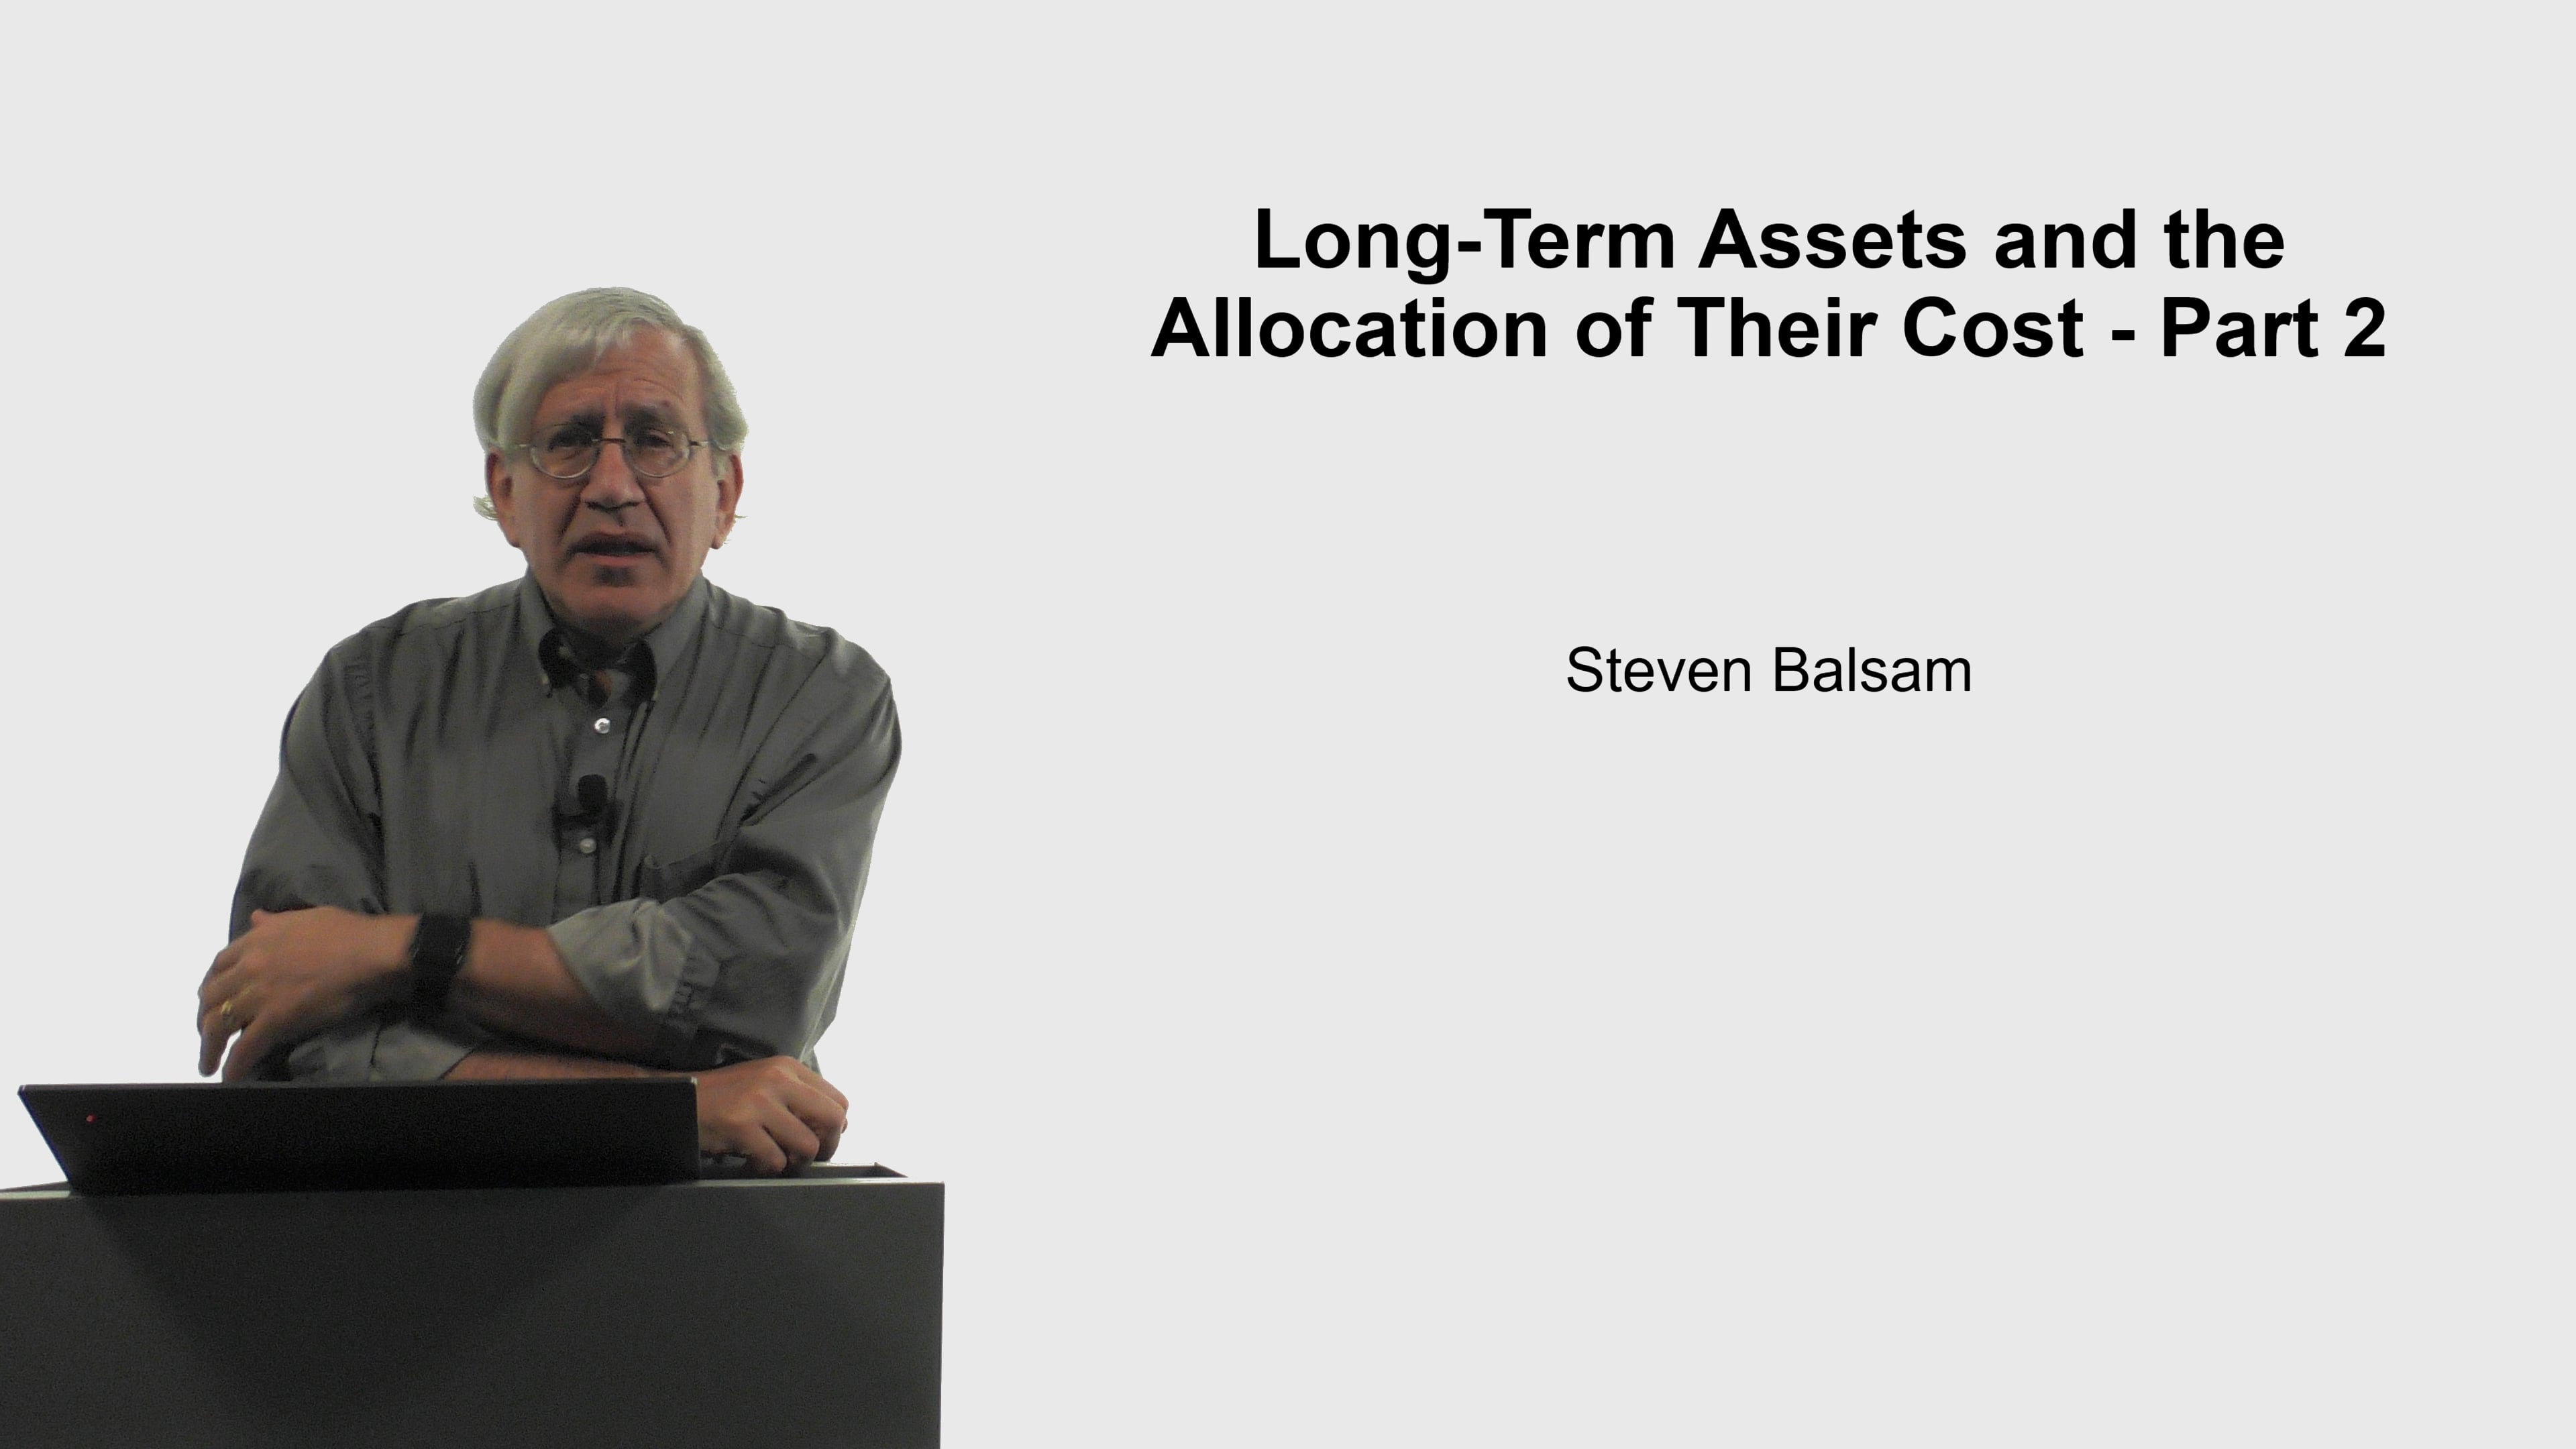 Long-Term Assets and the Allocation of Their Cost Part 2